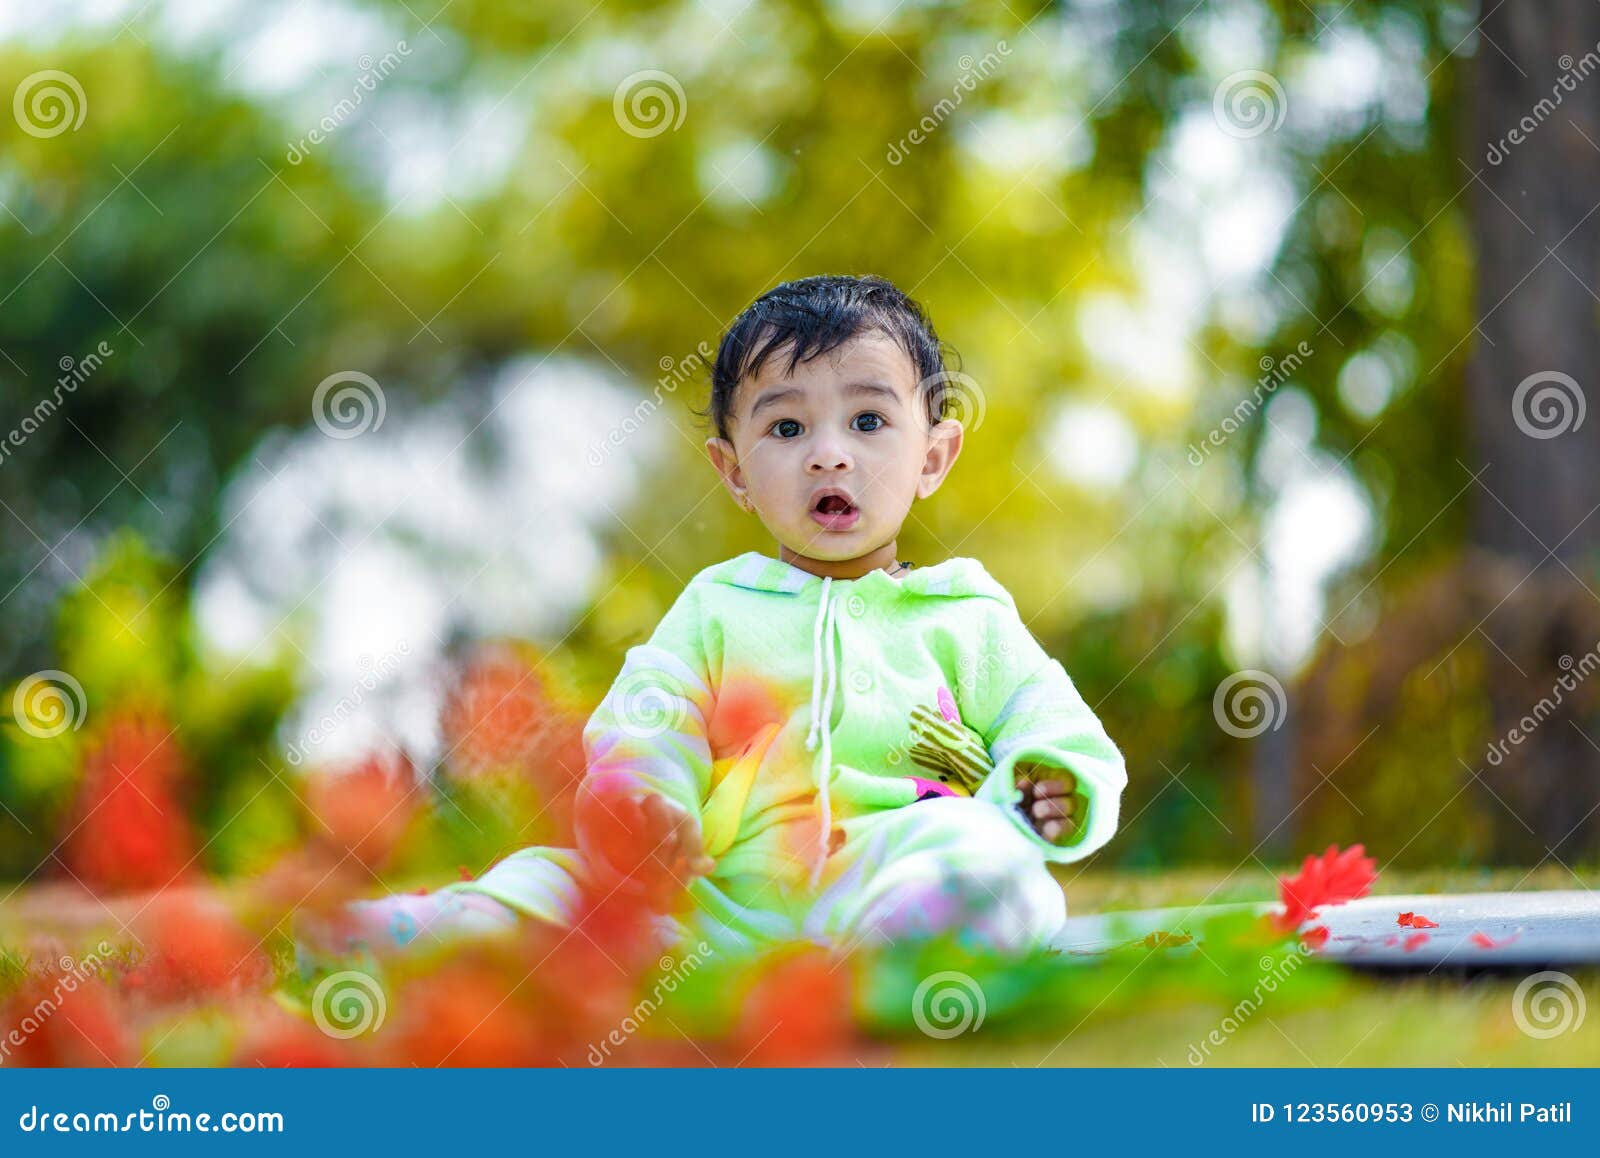 Cute Indian Baby Boy Playing at Garden Stock Image - Image of ...